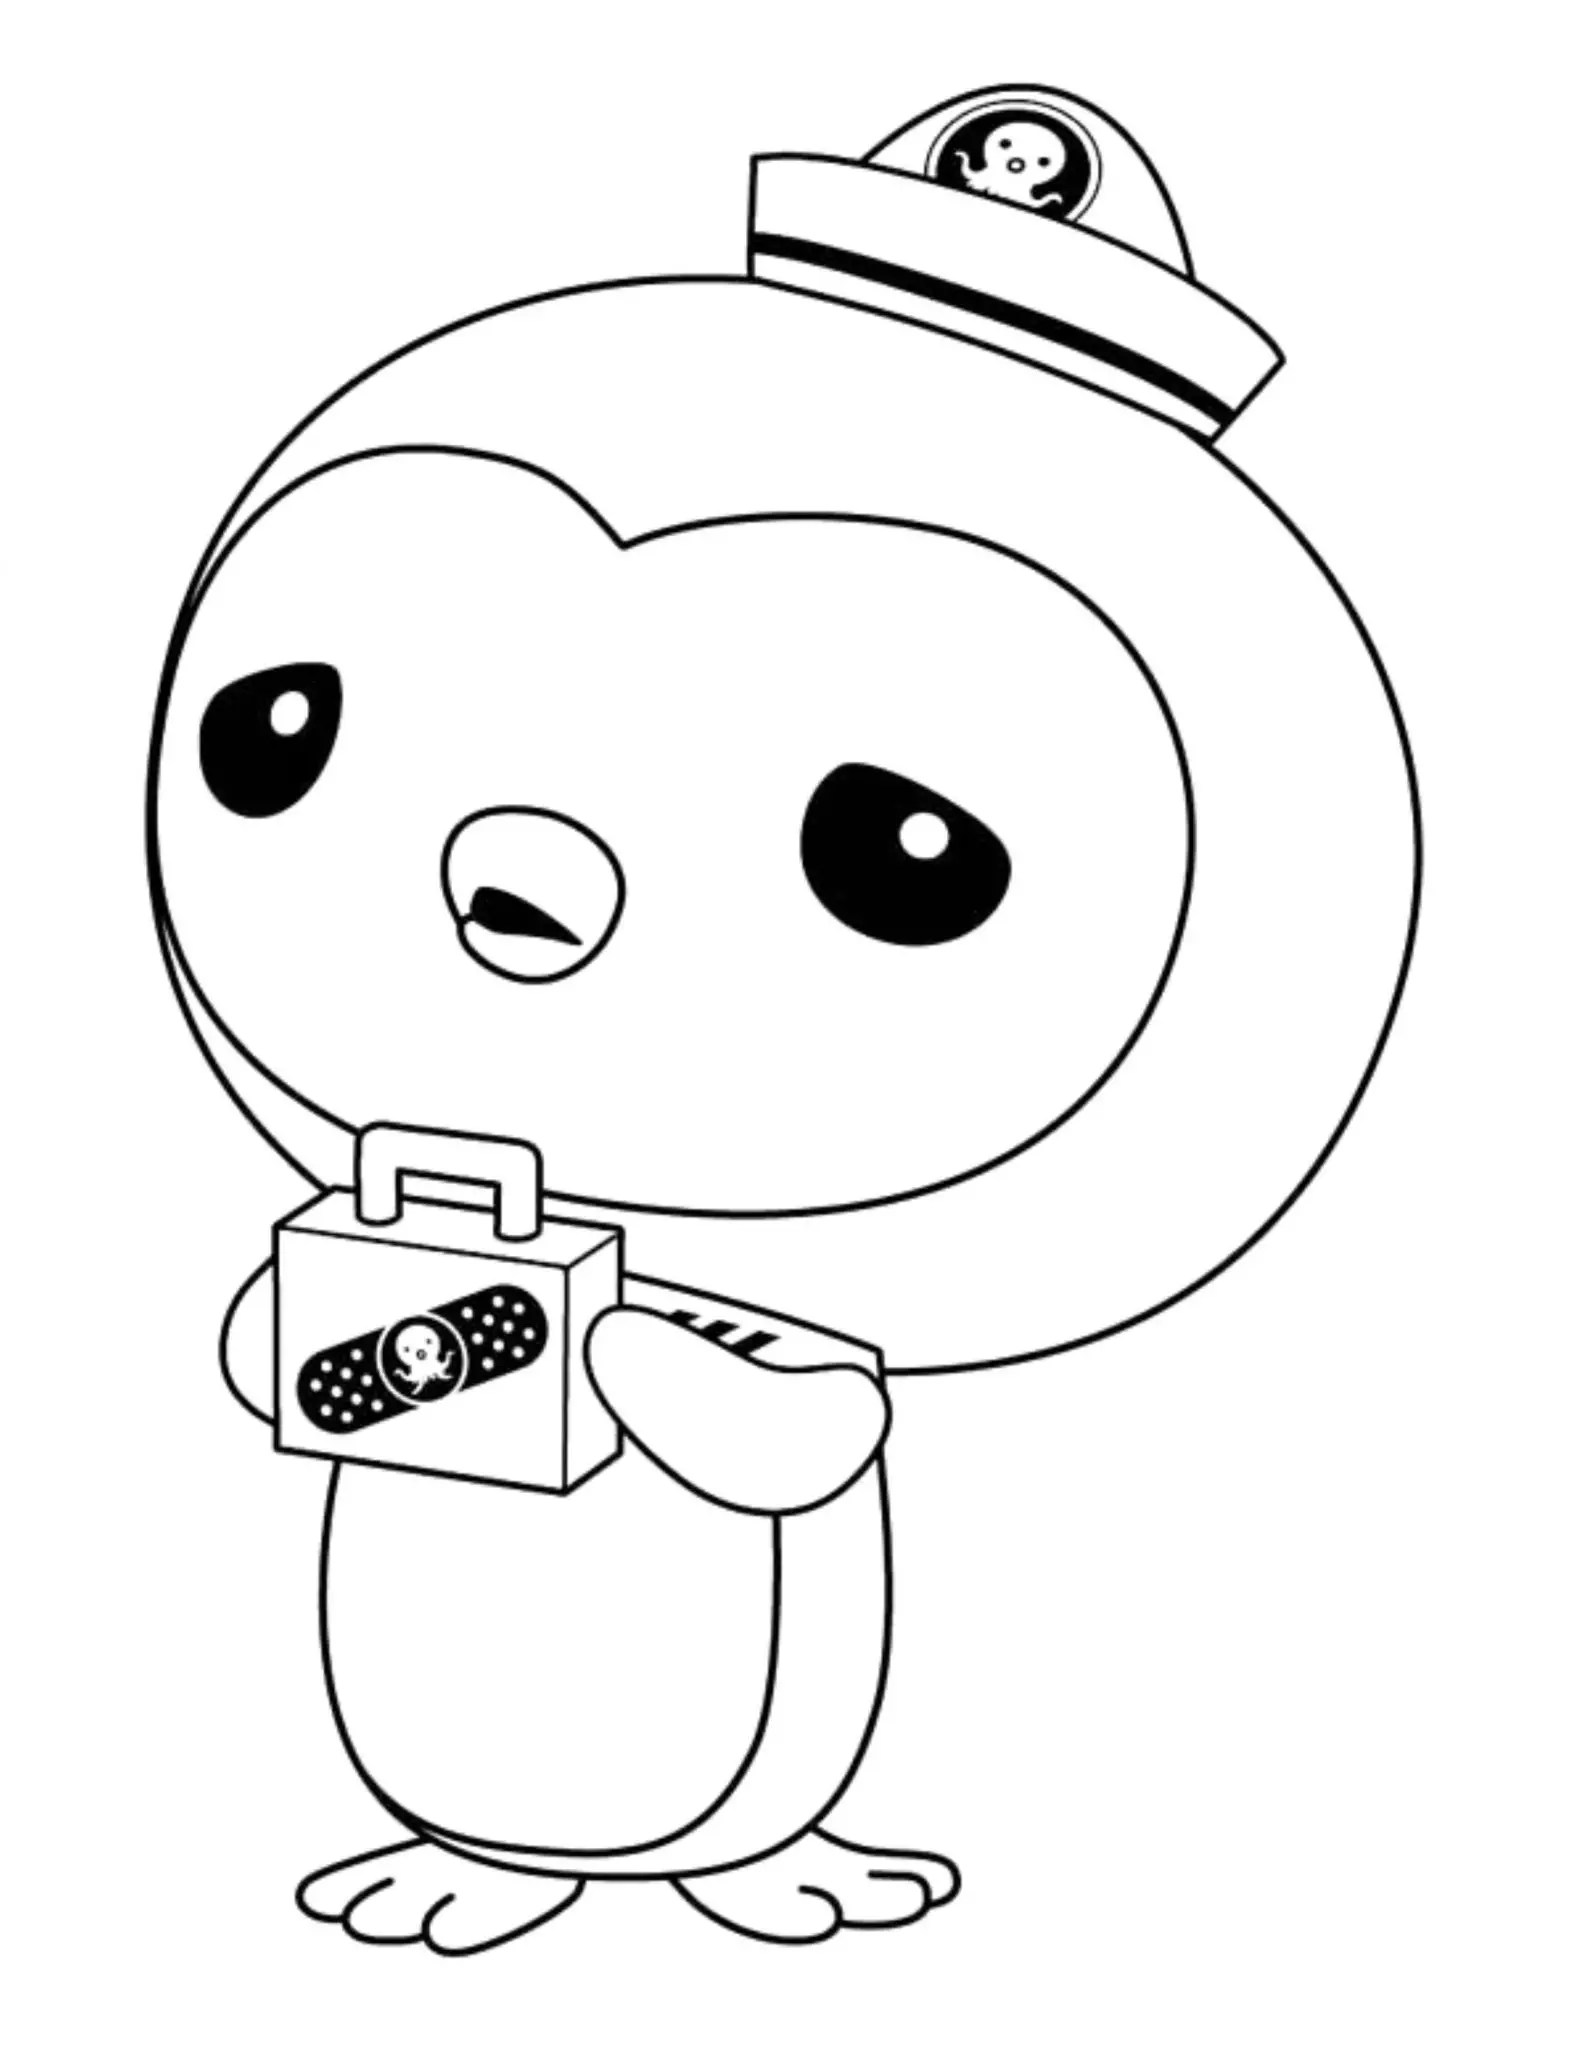 Free printable octonauts coloring pages for kids of all ages. Print & Download - Octonauts Coloring Pages for Your Kidâs Activity